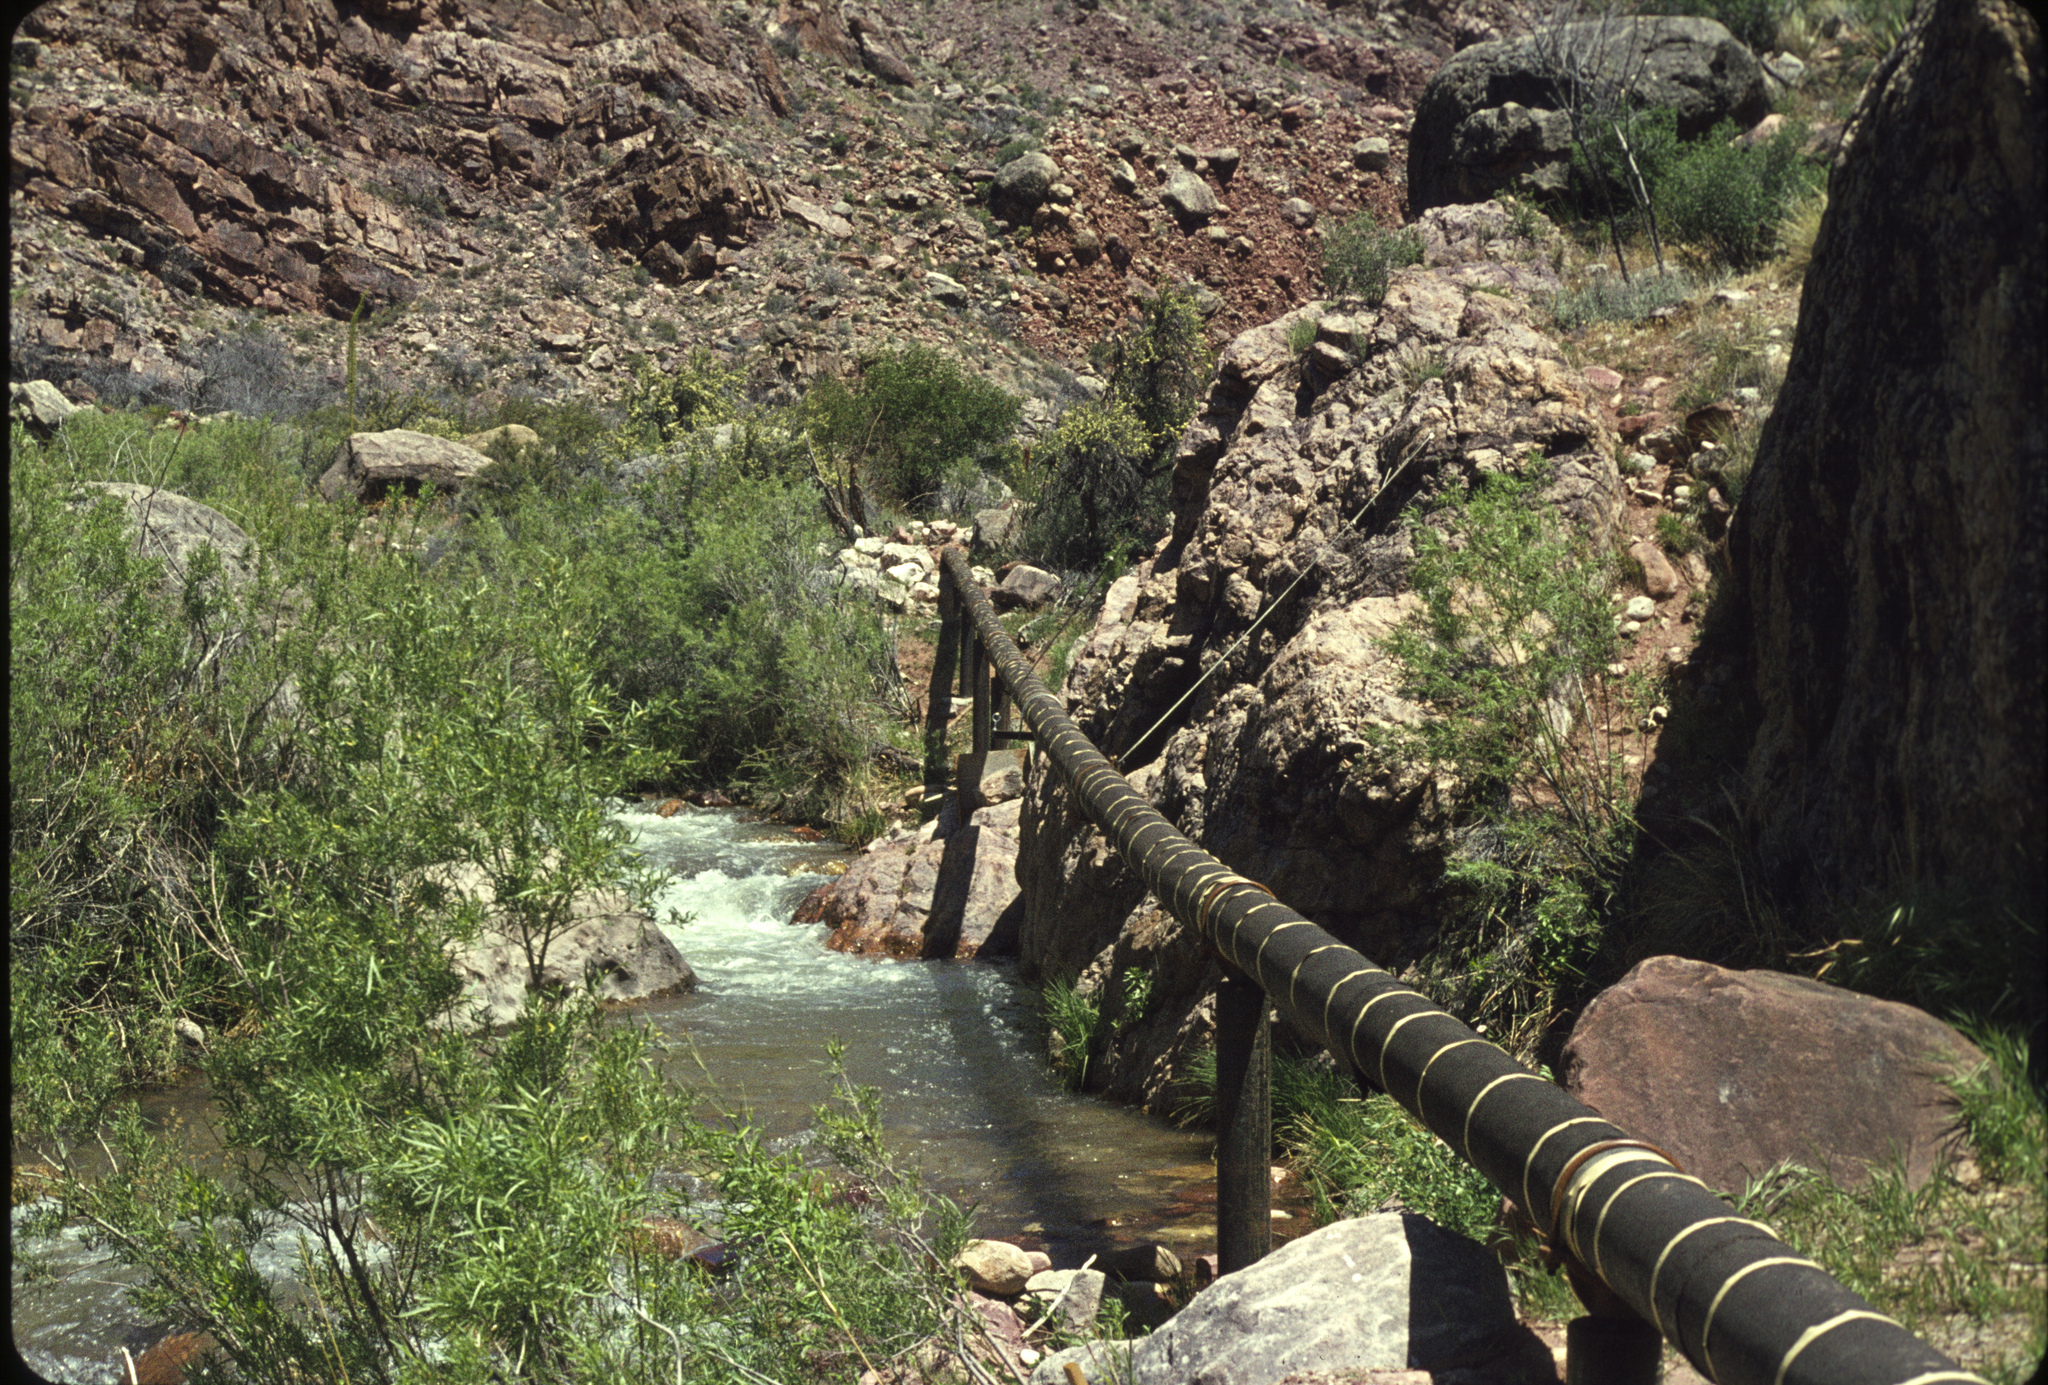 The Trans-Canyon pipeline running above a rocky stream.